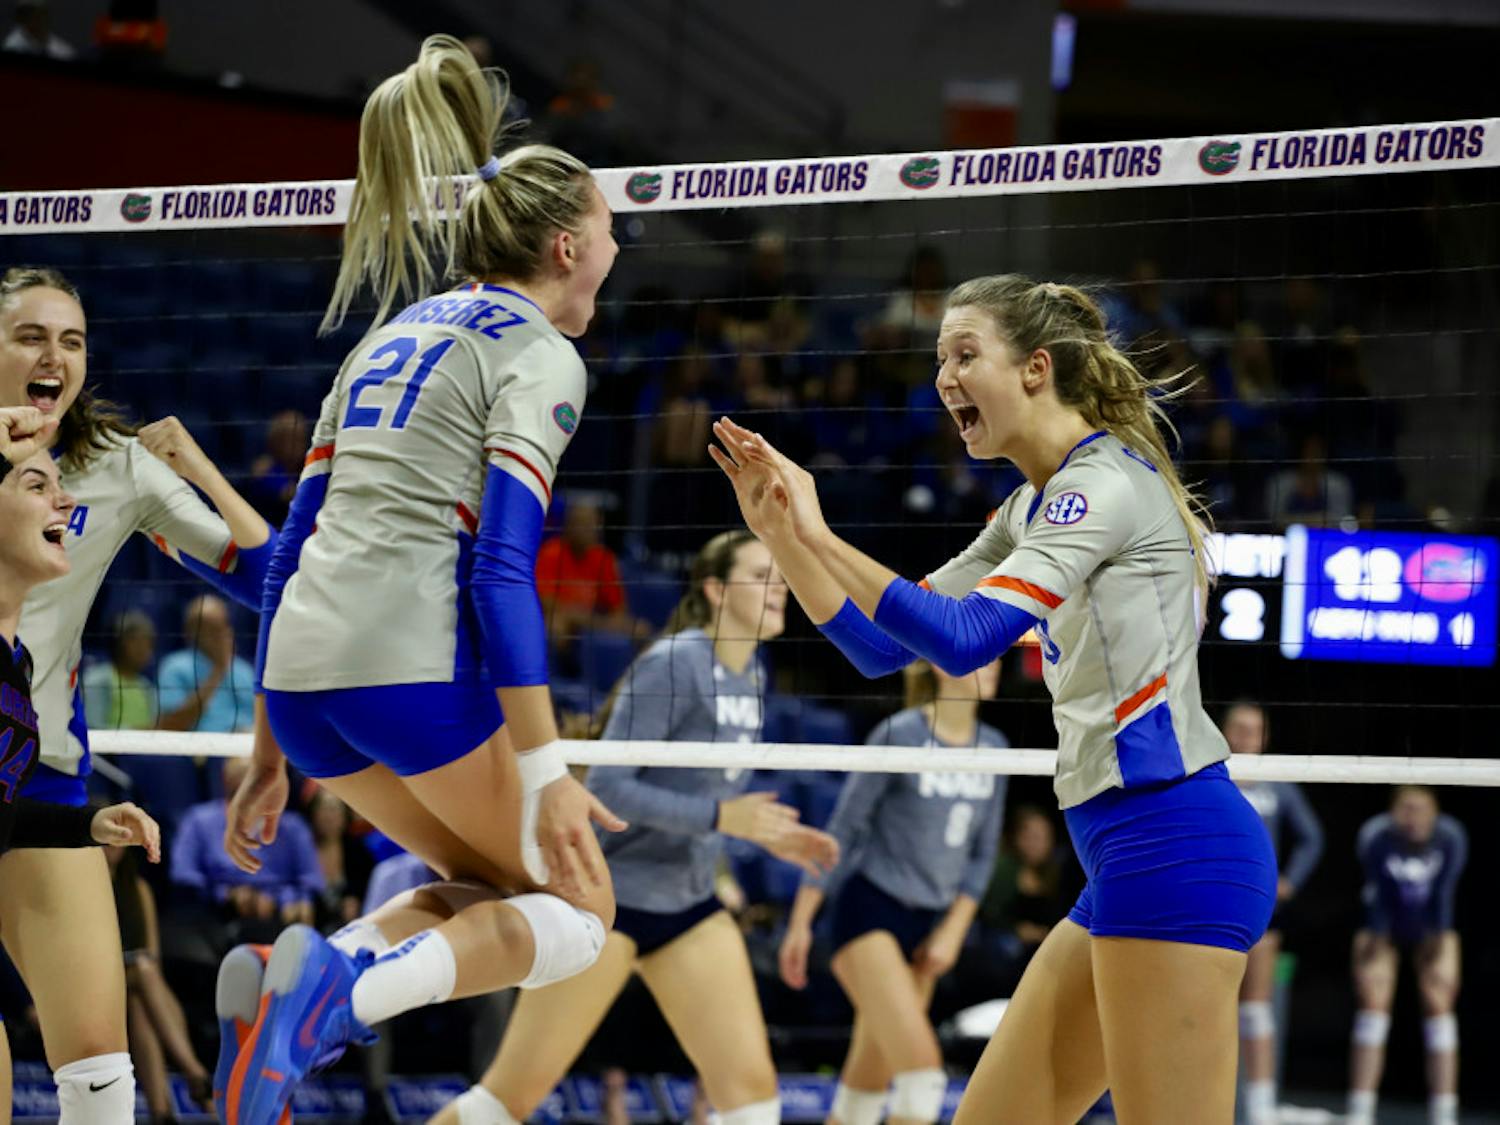 Redshirt junior opposite attacker Holly Carlton (right) and sophomore setter Marlie Monserez (left) combined for 46 assists on Saturday against the Texas A&amp;M Aggies.